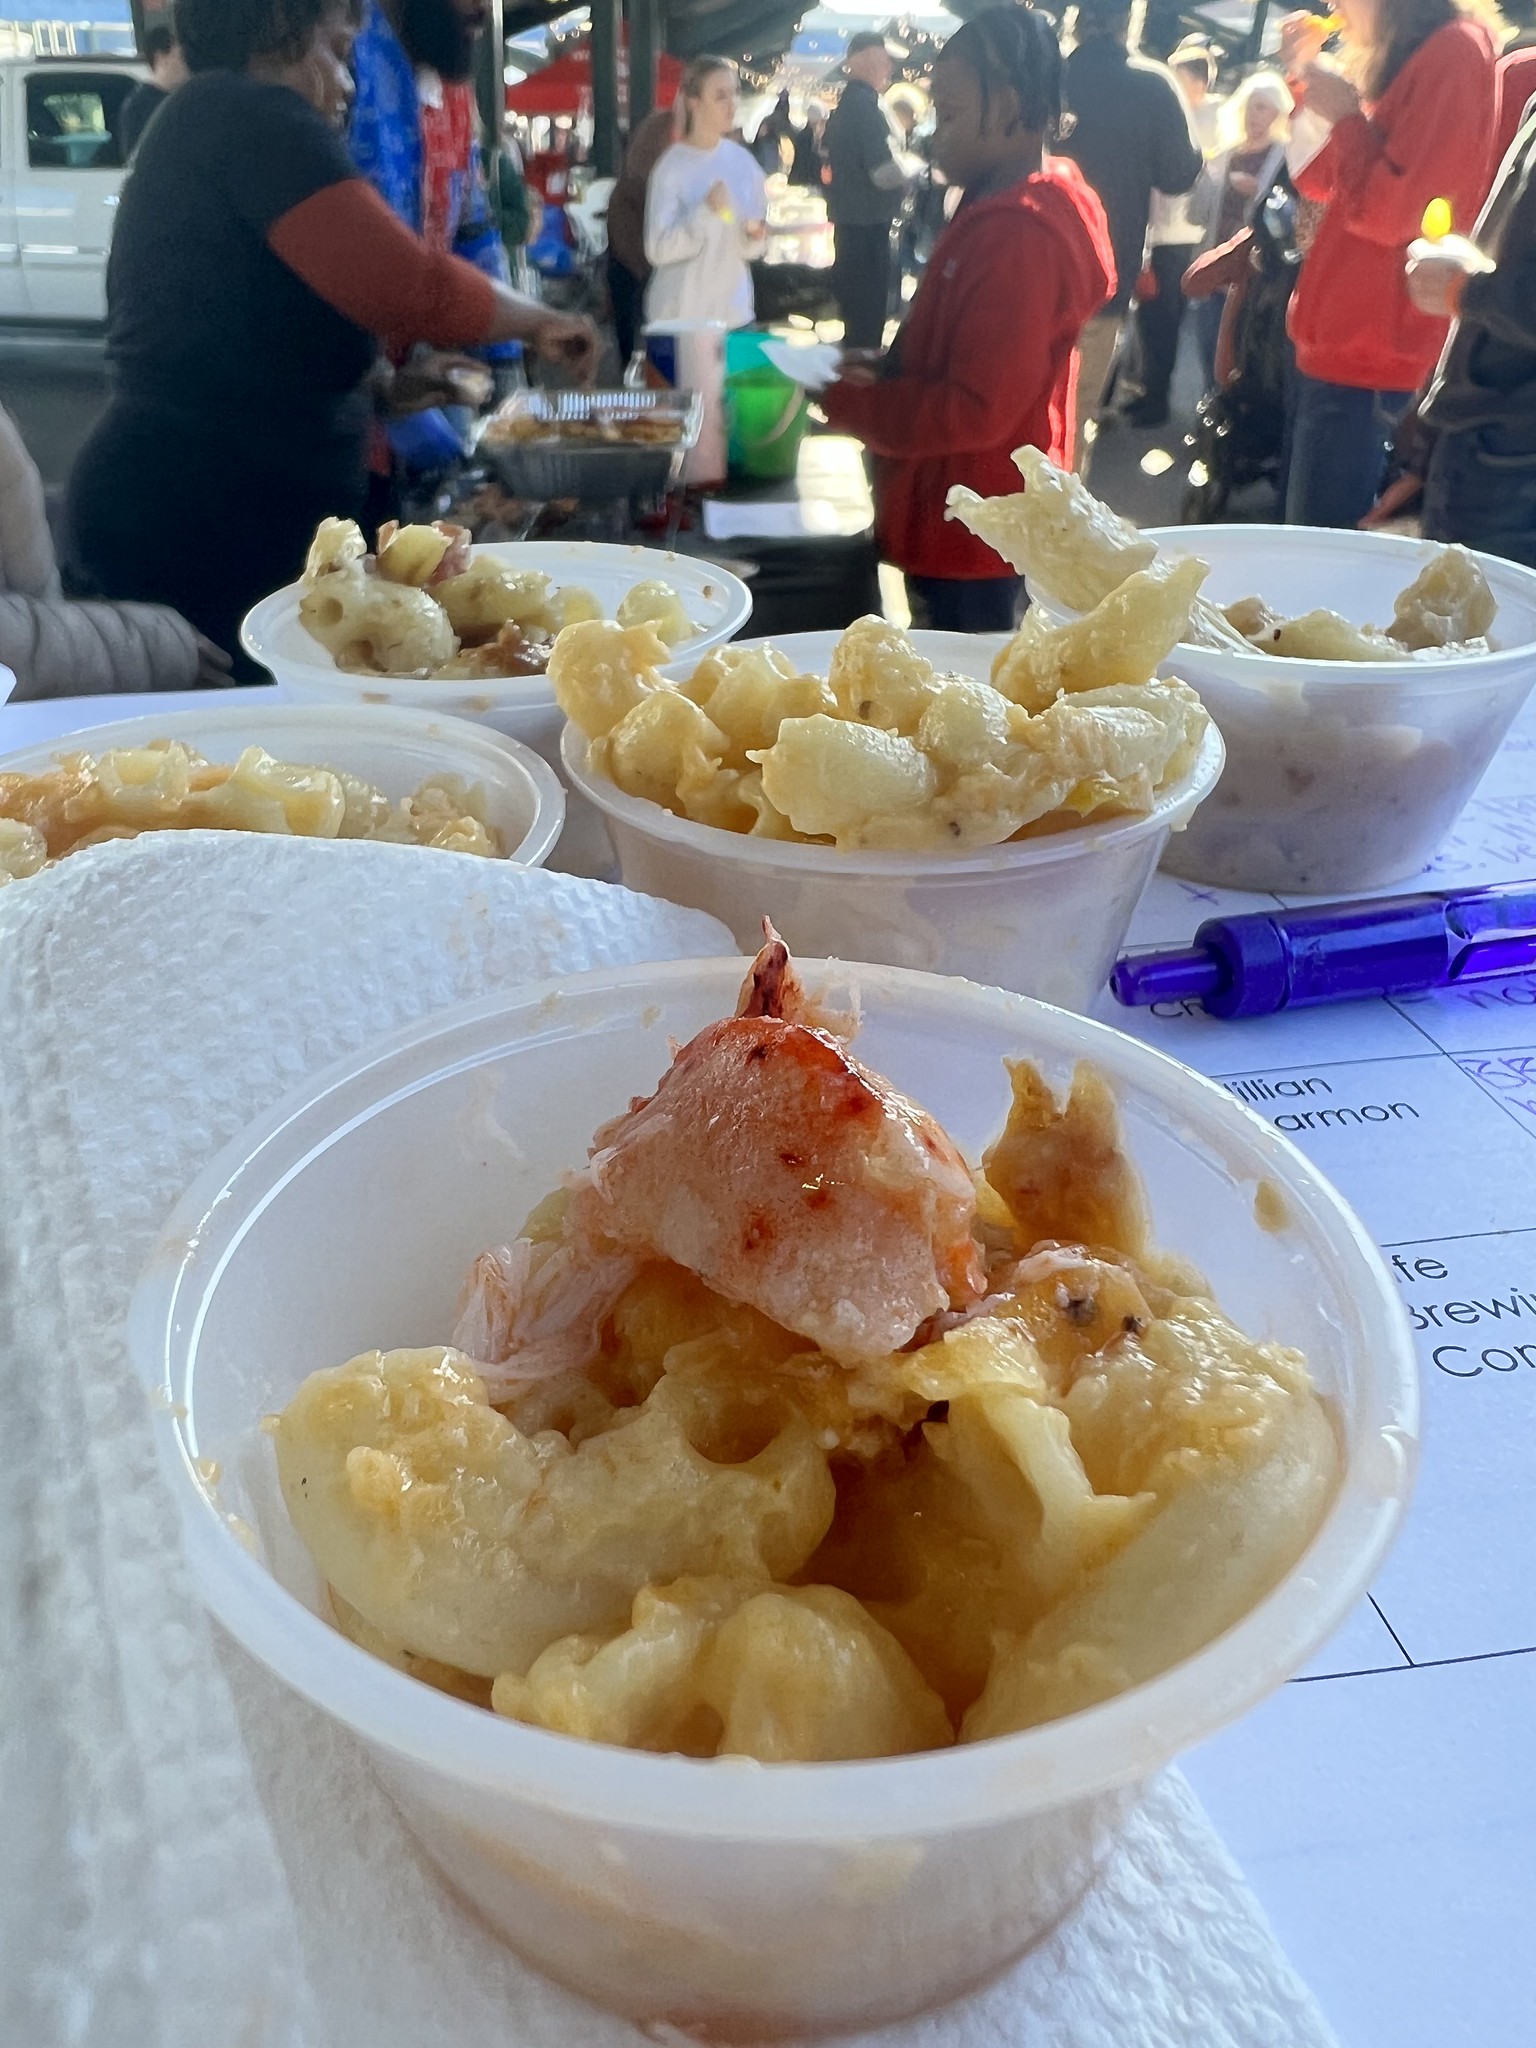 Mac & Cheese Cookoff